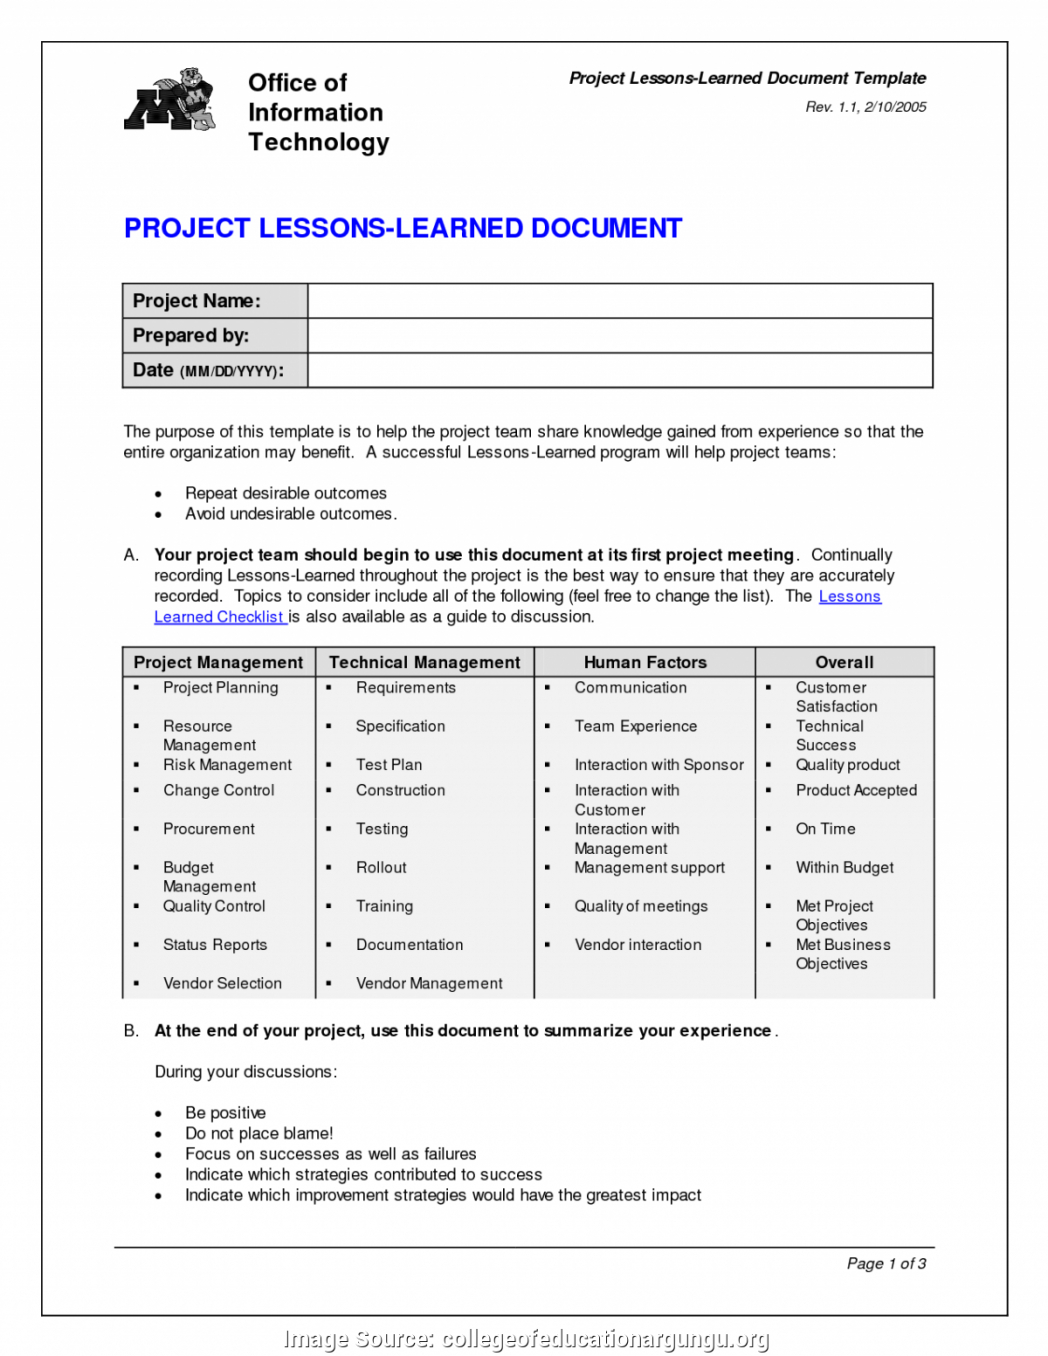 Project Management Final Report Template – Atlantaauctionco Inside Project Management Final Report Template